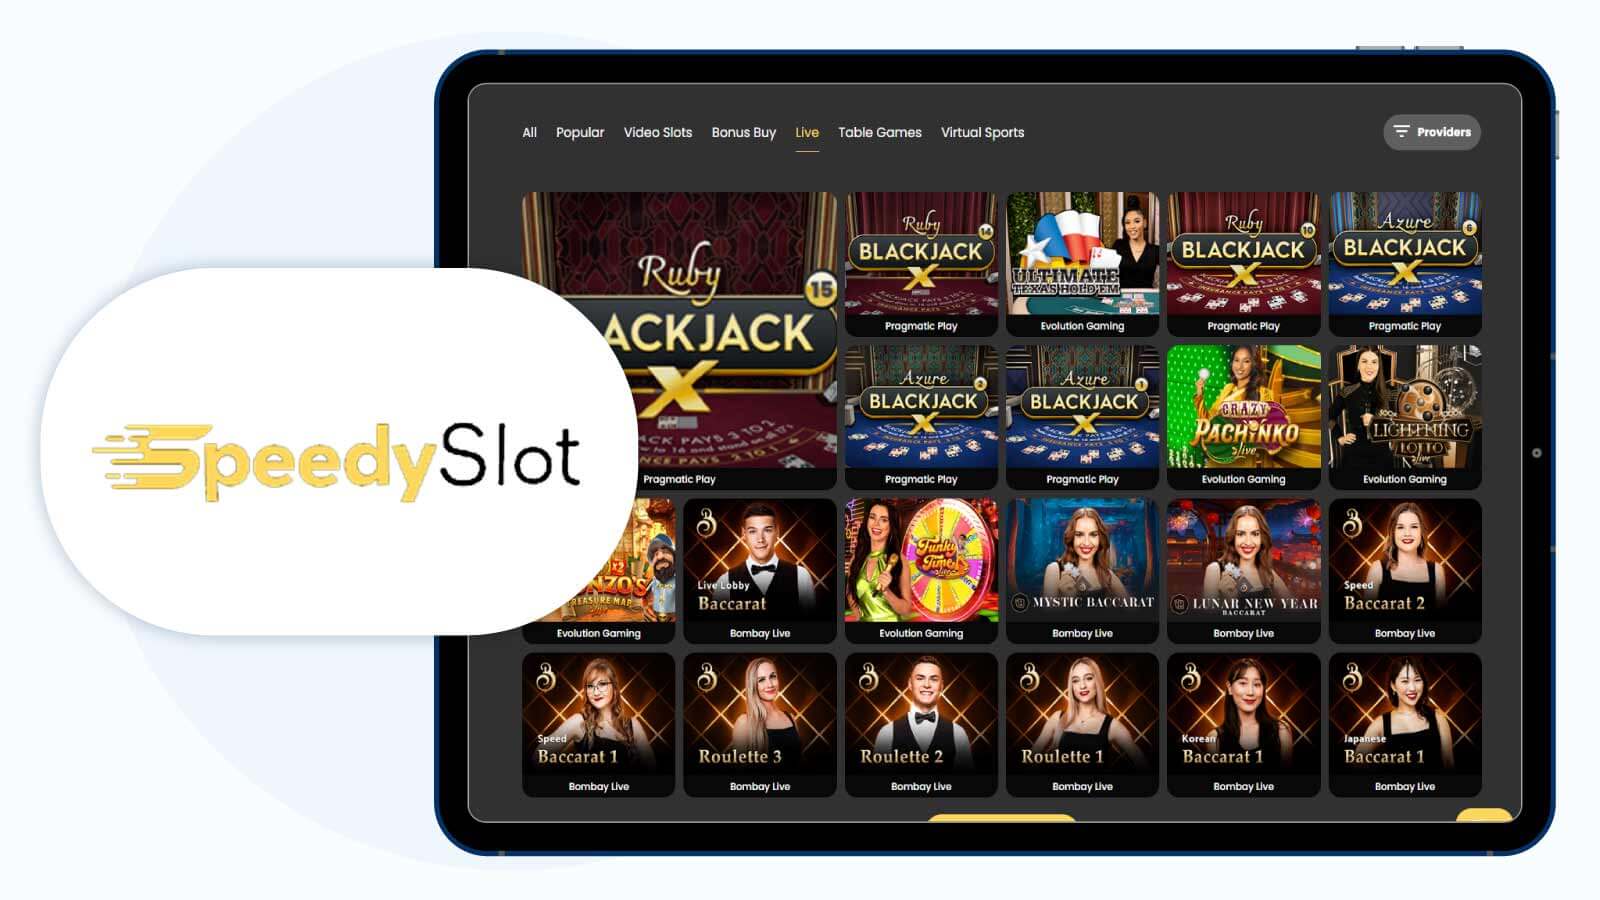 Activate-the-10-Free-Spins-and-Explore-a-top-Live-Casino-Speedy-Slot